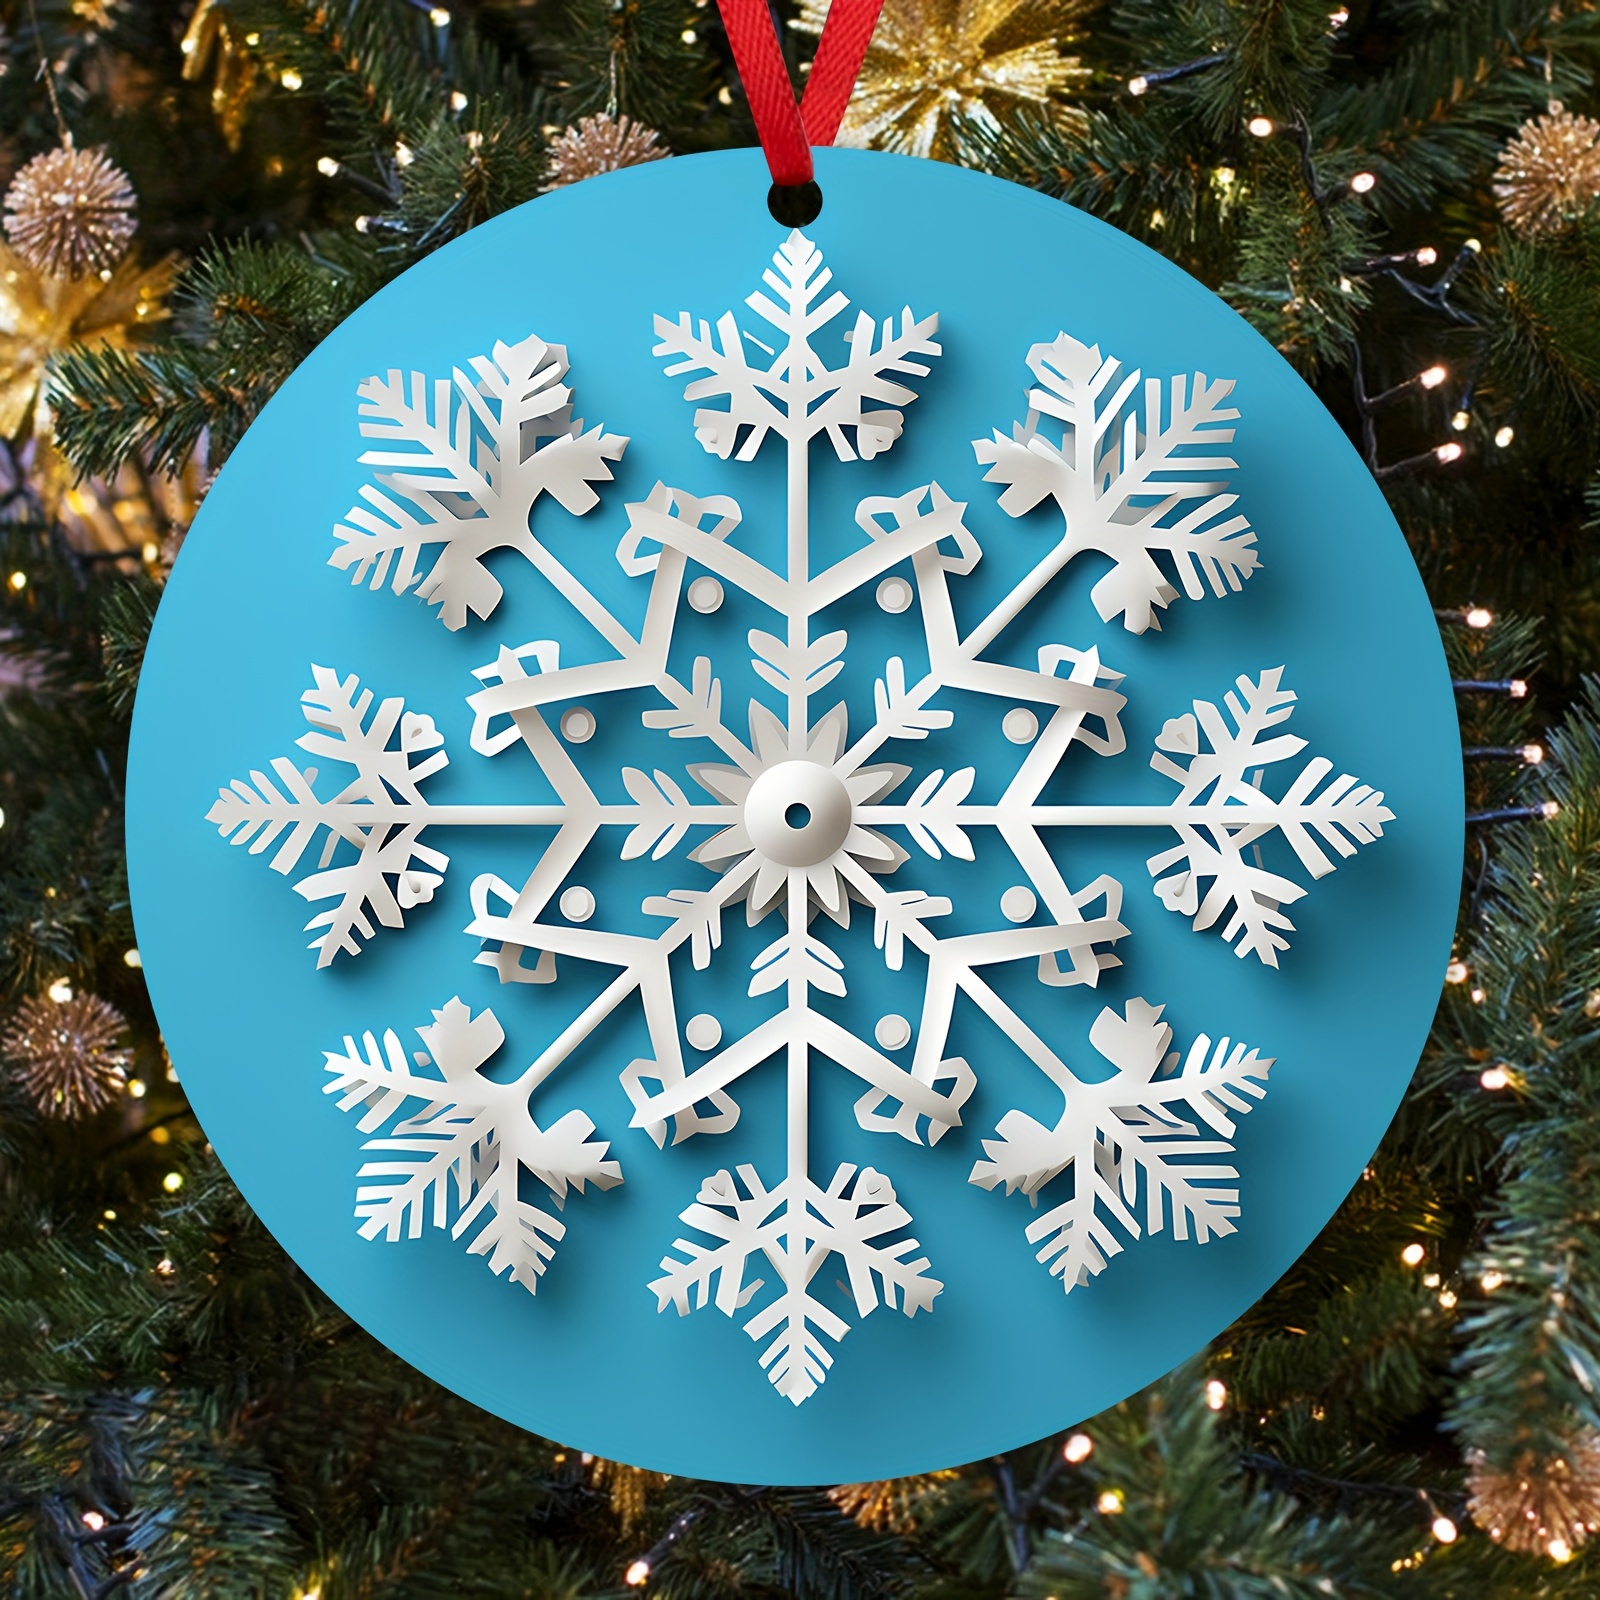 Large Hanging Wooden Snowflake Christmas Tree Ornament Rustic